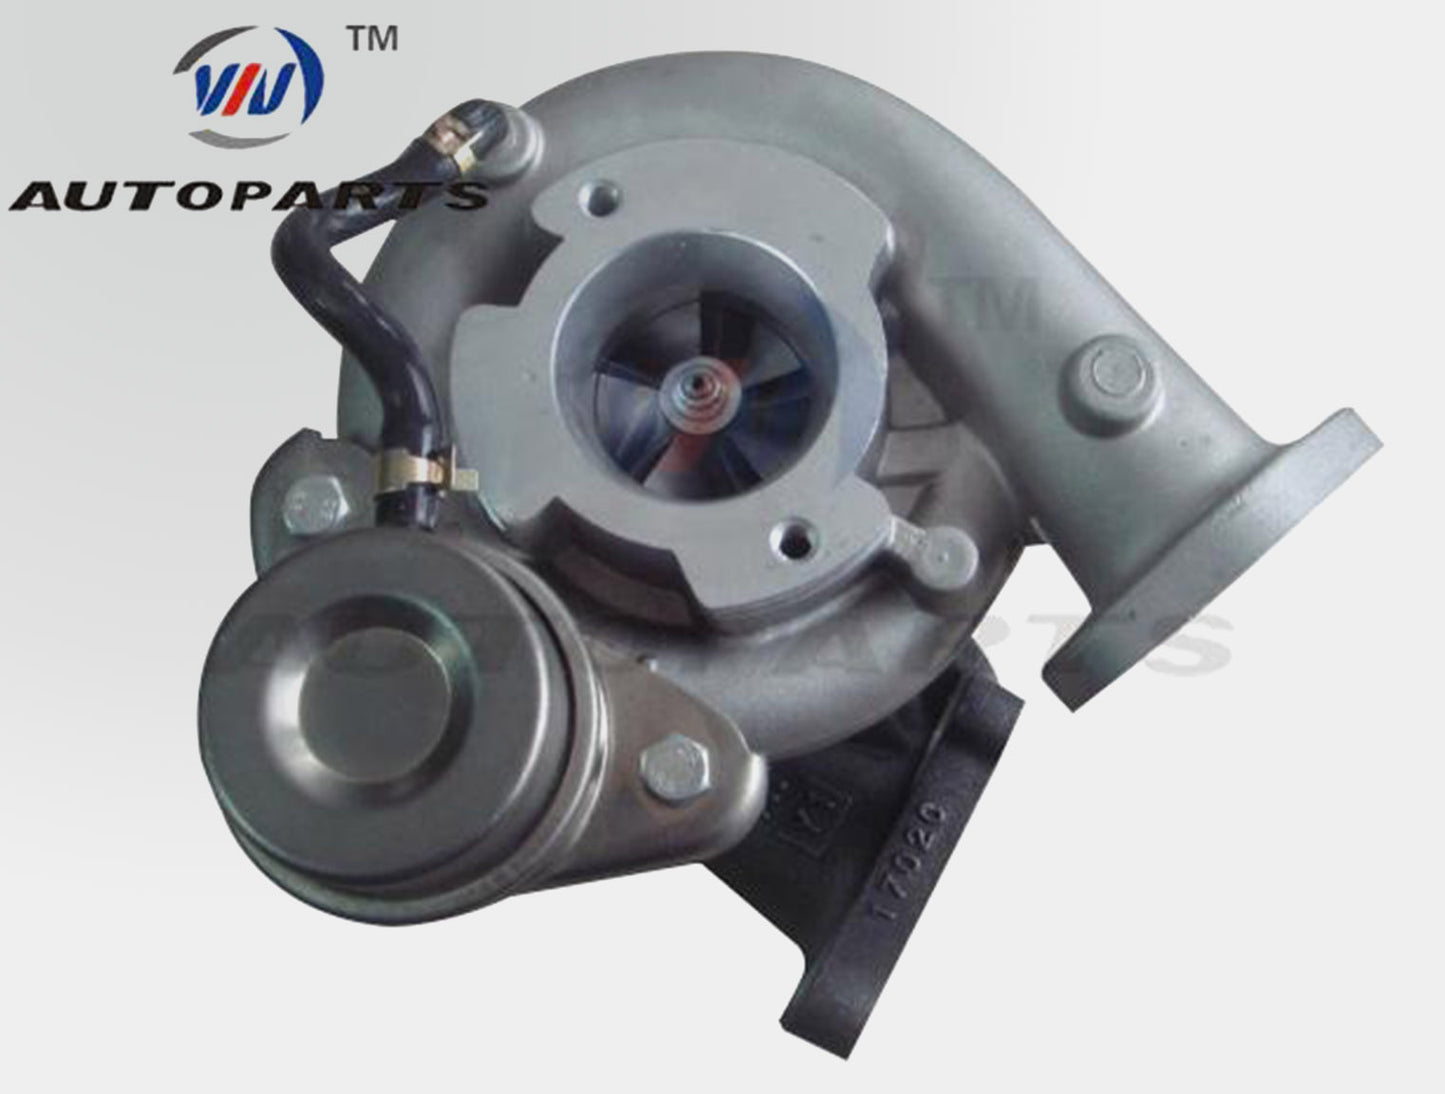 Turbocharger 17201-17040 for Toyota Land Cruiser with 1HDFTE 4.2L Diesel Engine